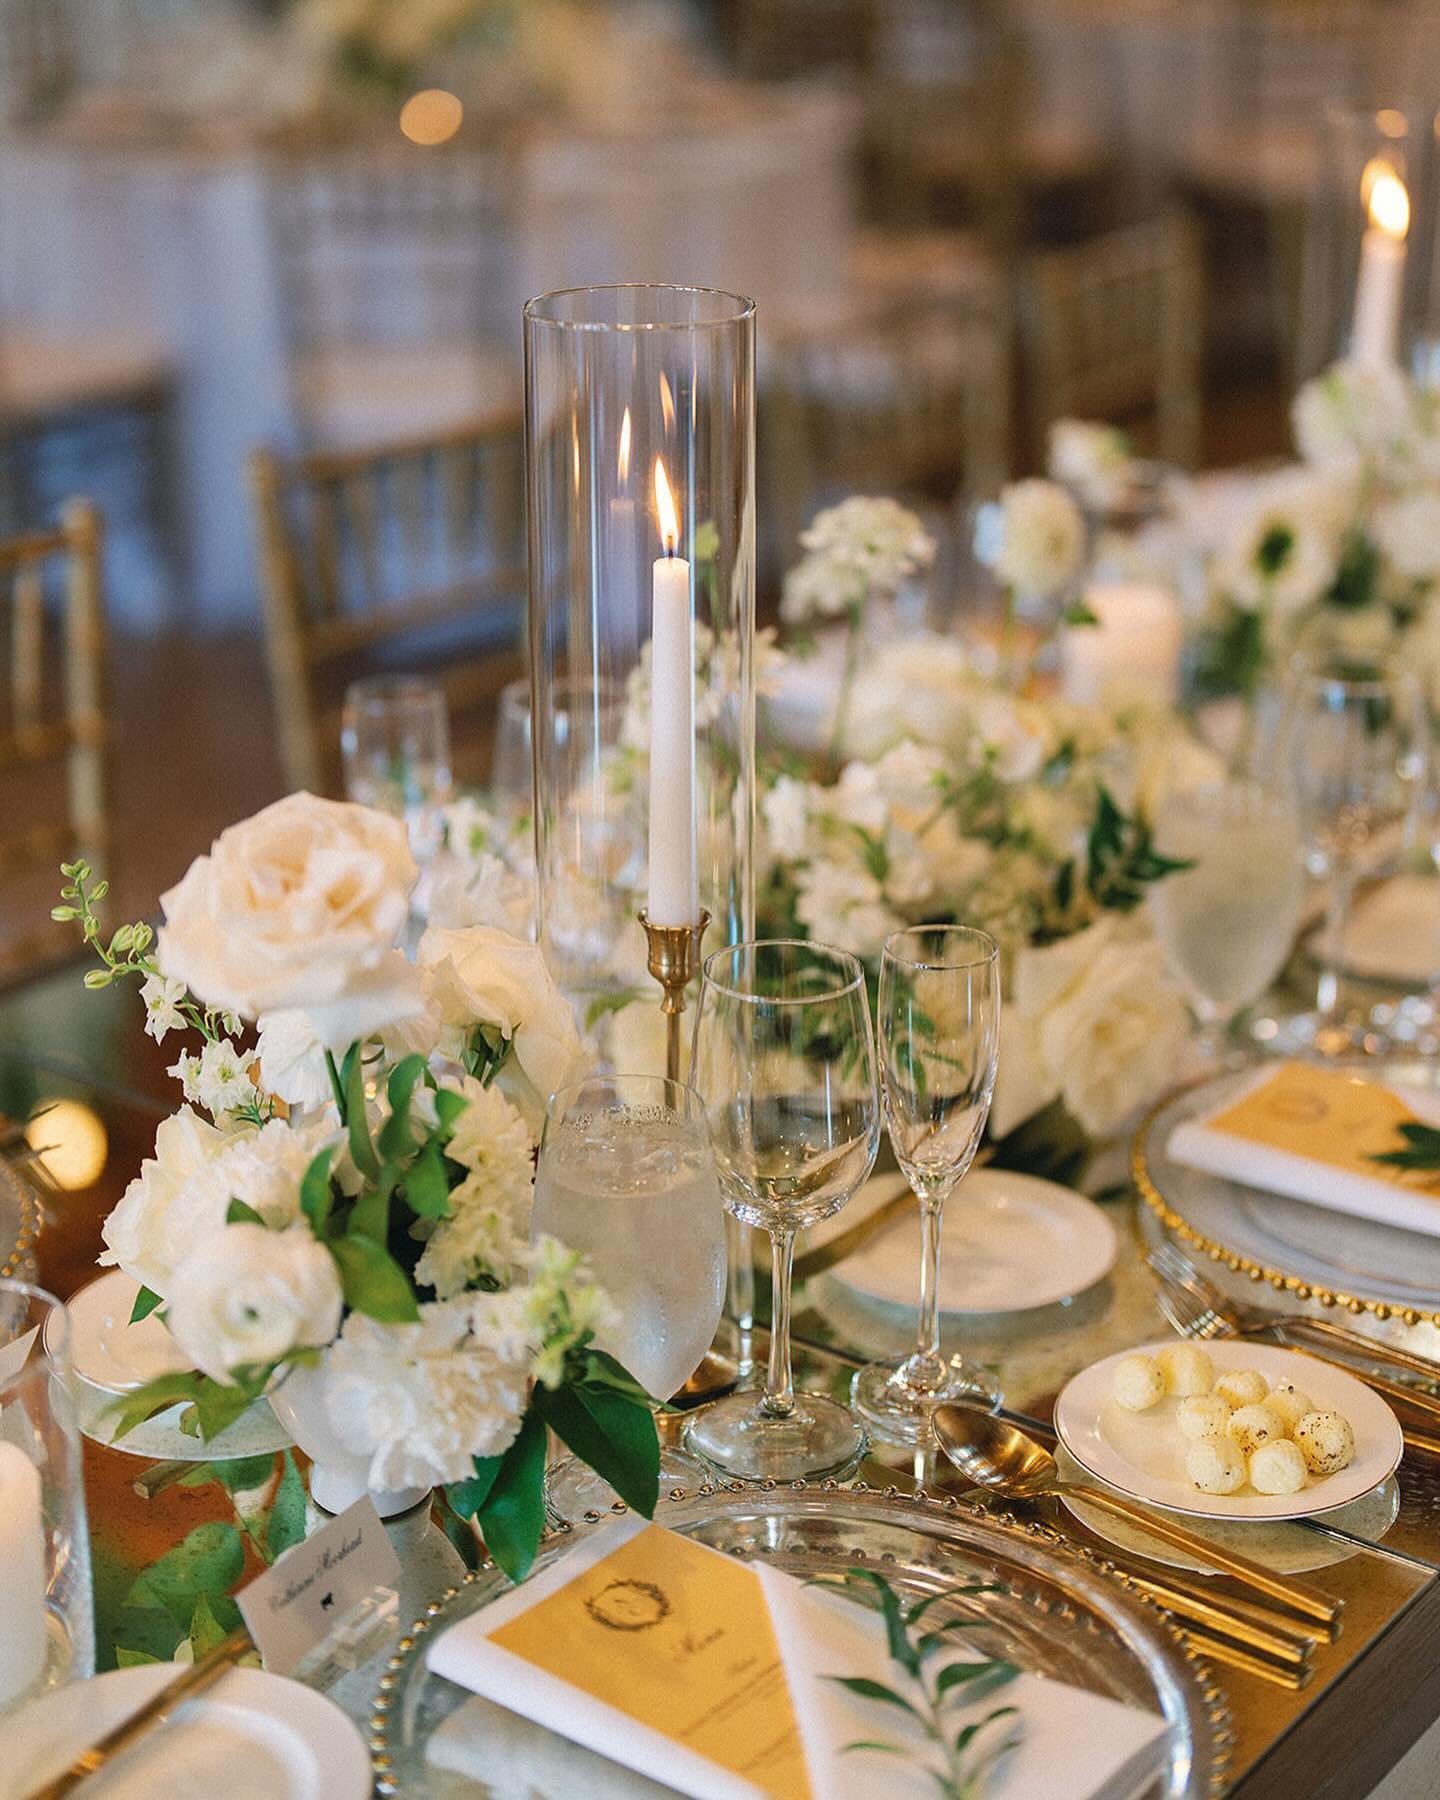 Tapers and sweet little gold rimmed votives for this elegant tablescape ✨#candles #weddingcandles #eventcandles #corporateevents #corporateeventrentals #austincorporateevents #austineventrentals #austinweddingrentals #dallasevents #dallaseventrentals